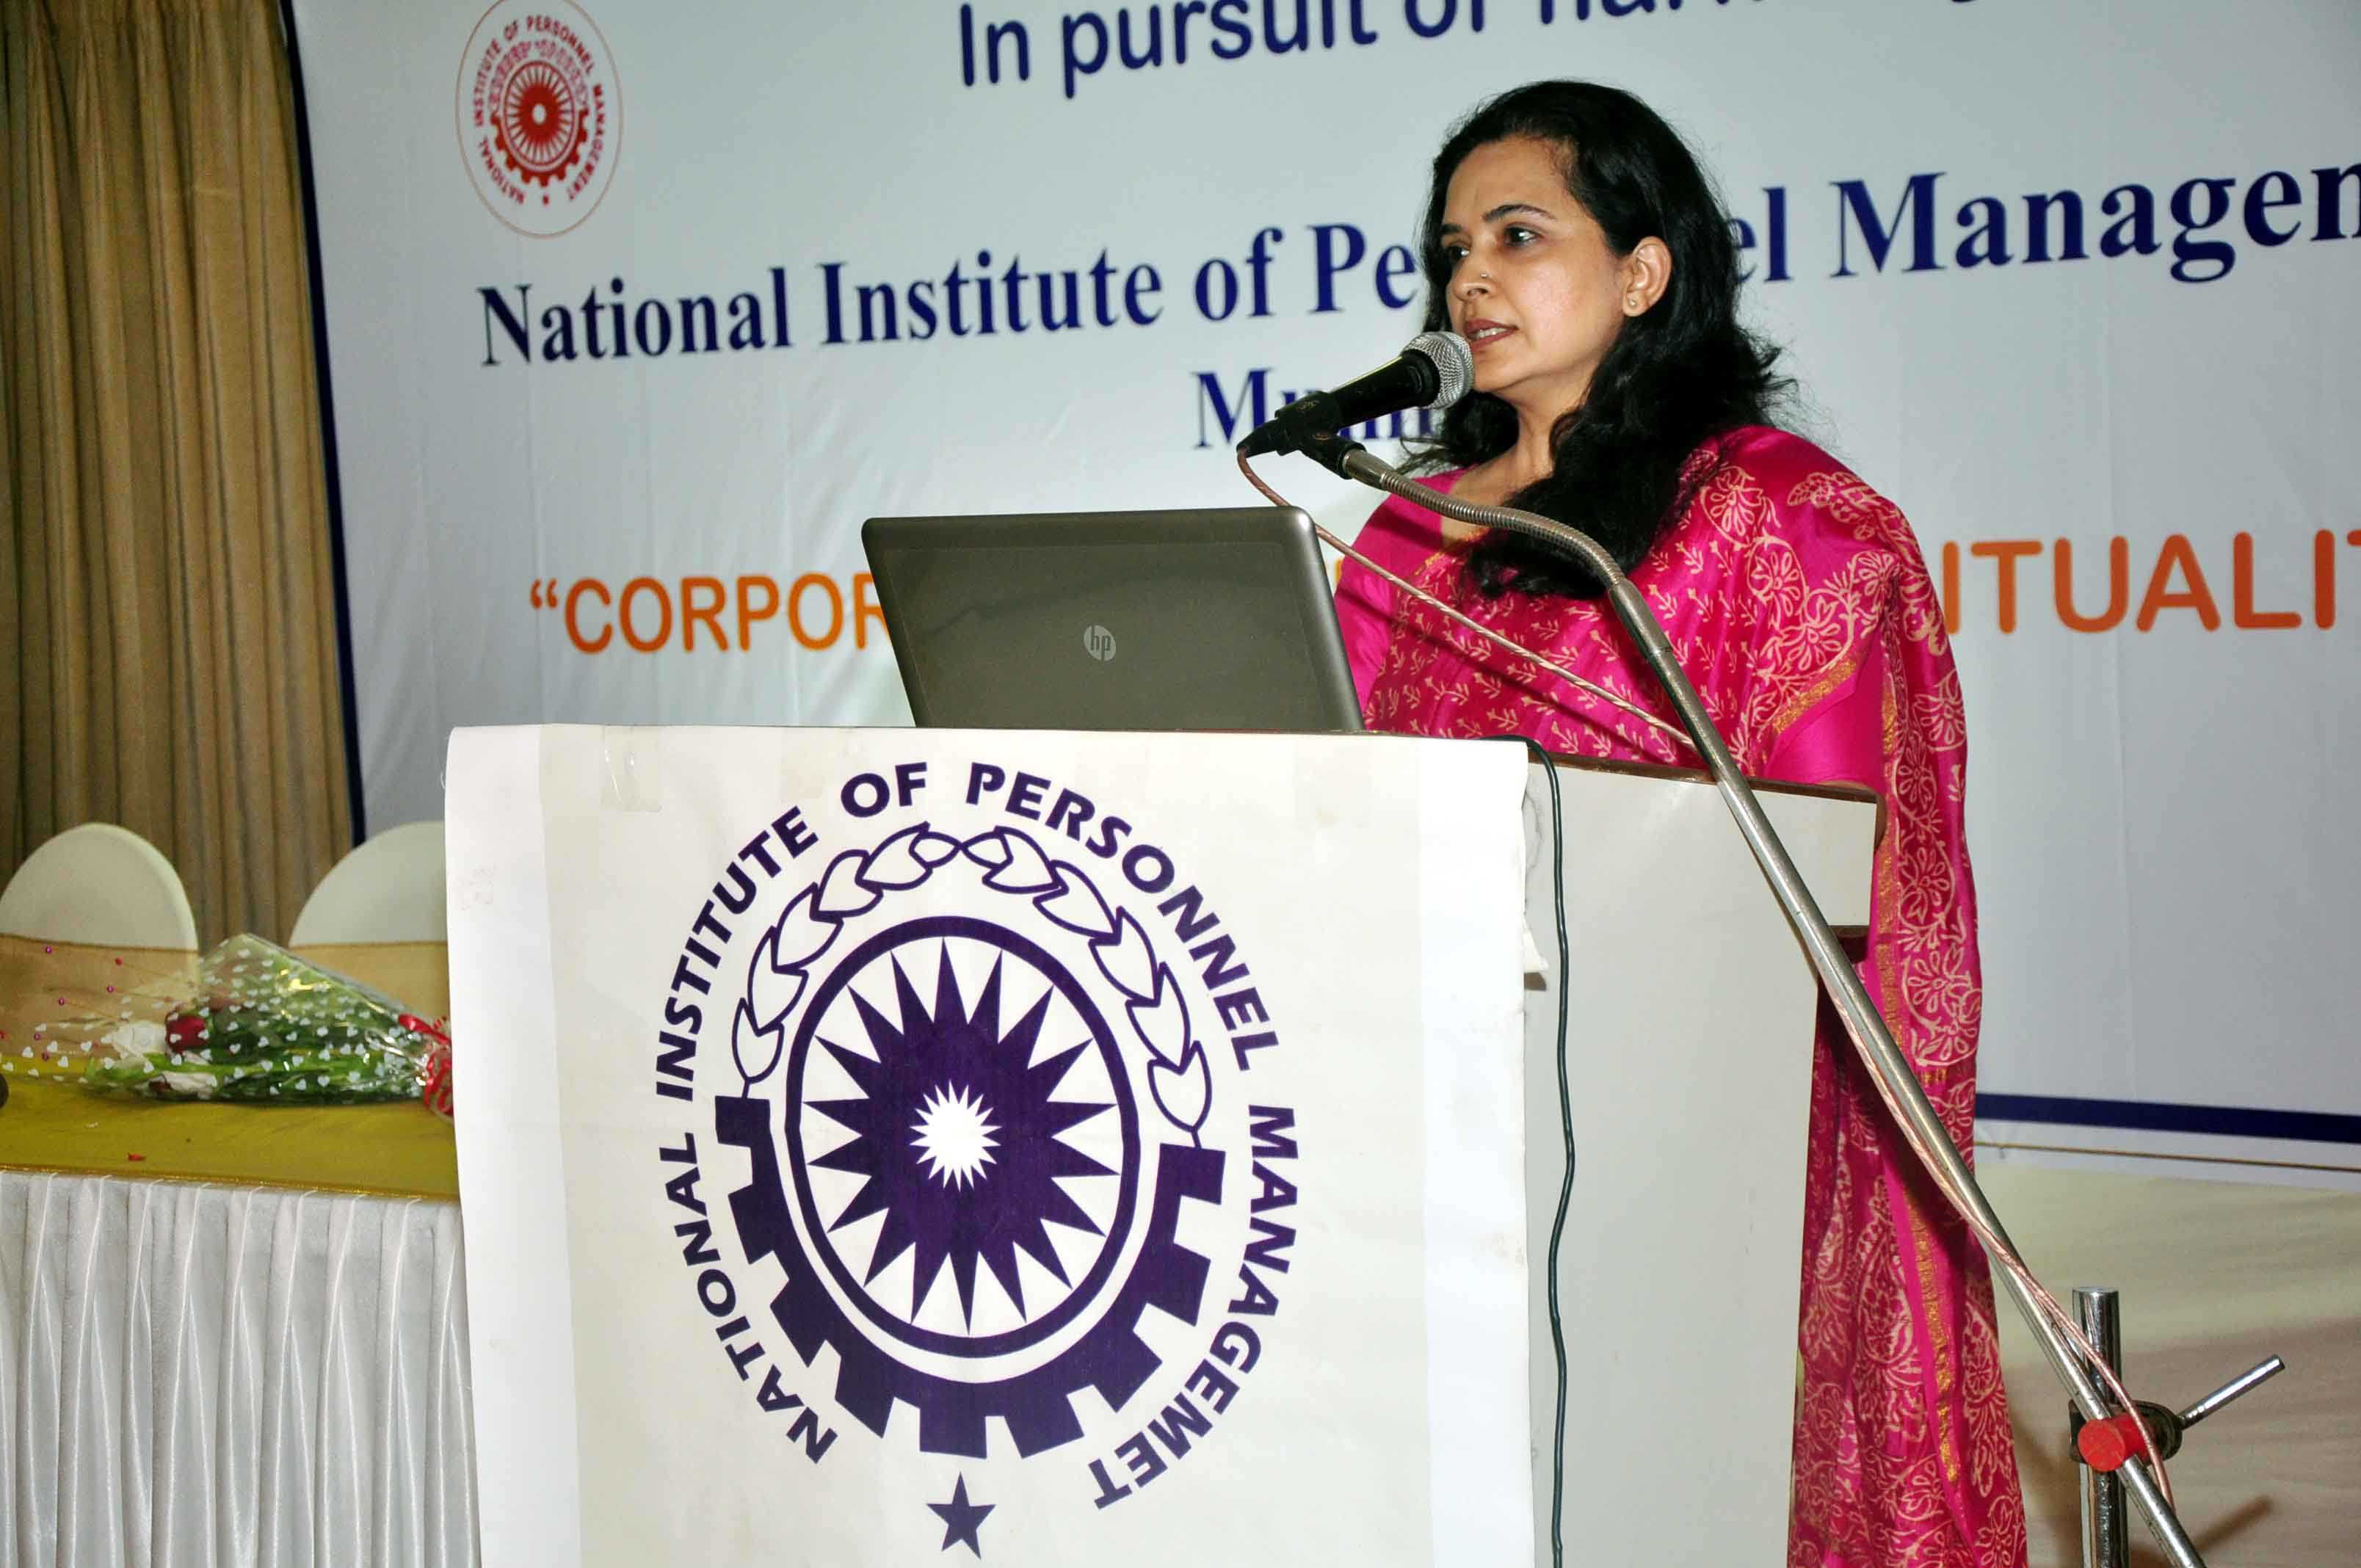 Distinguished speaker at NIPM Conference on Corporate Culture and Spirituality